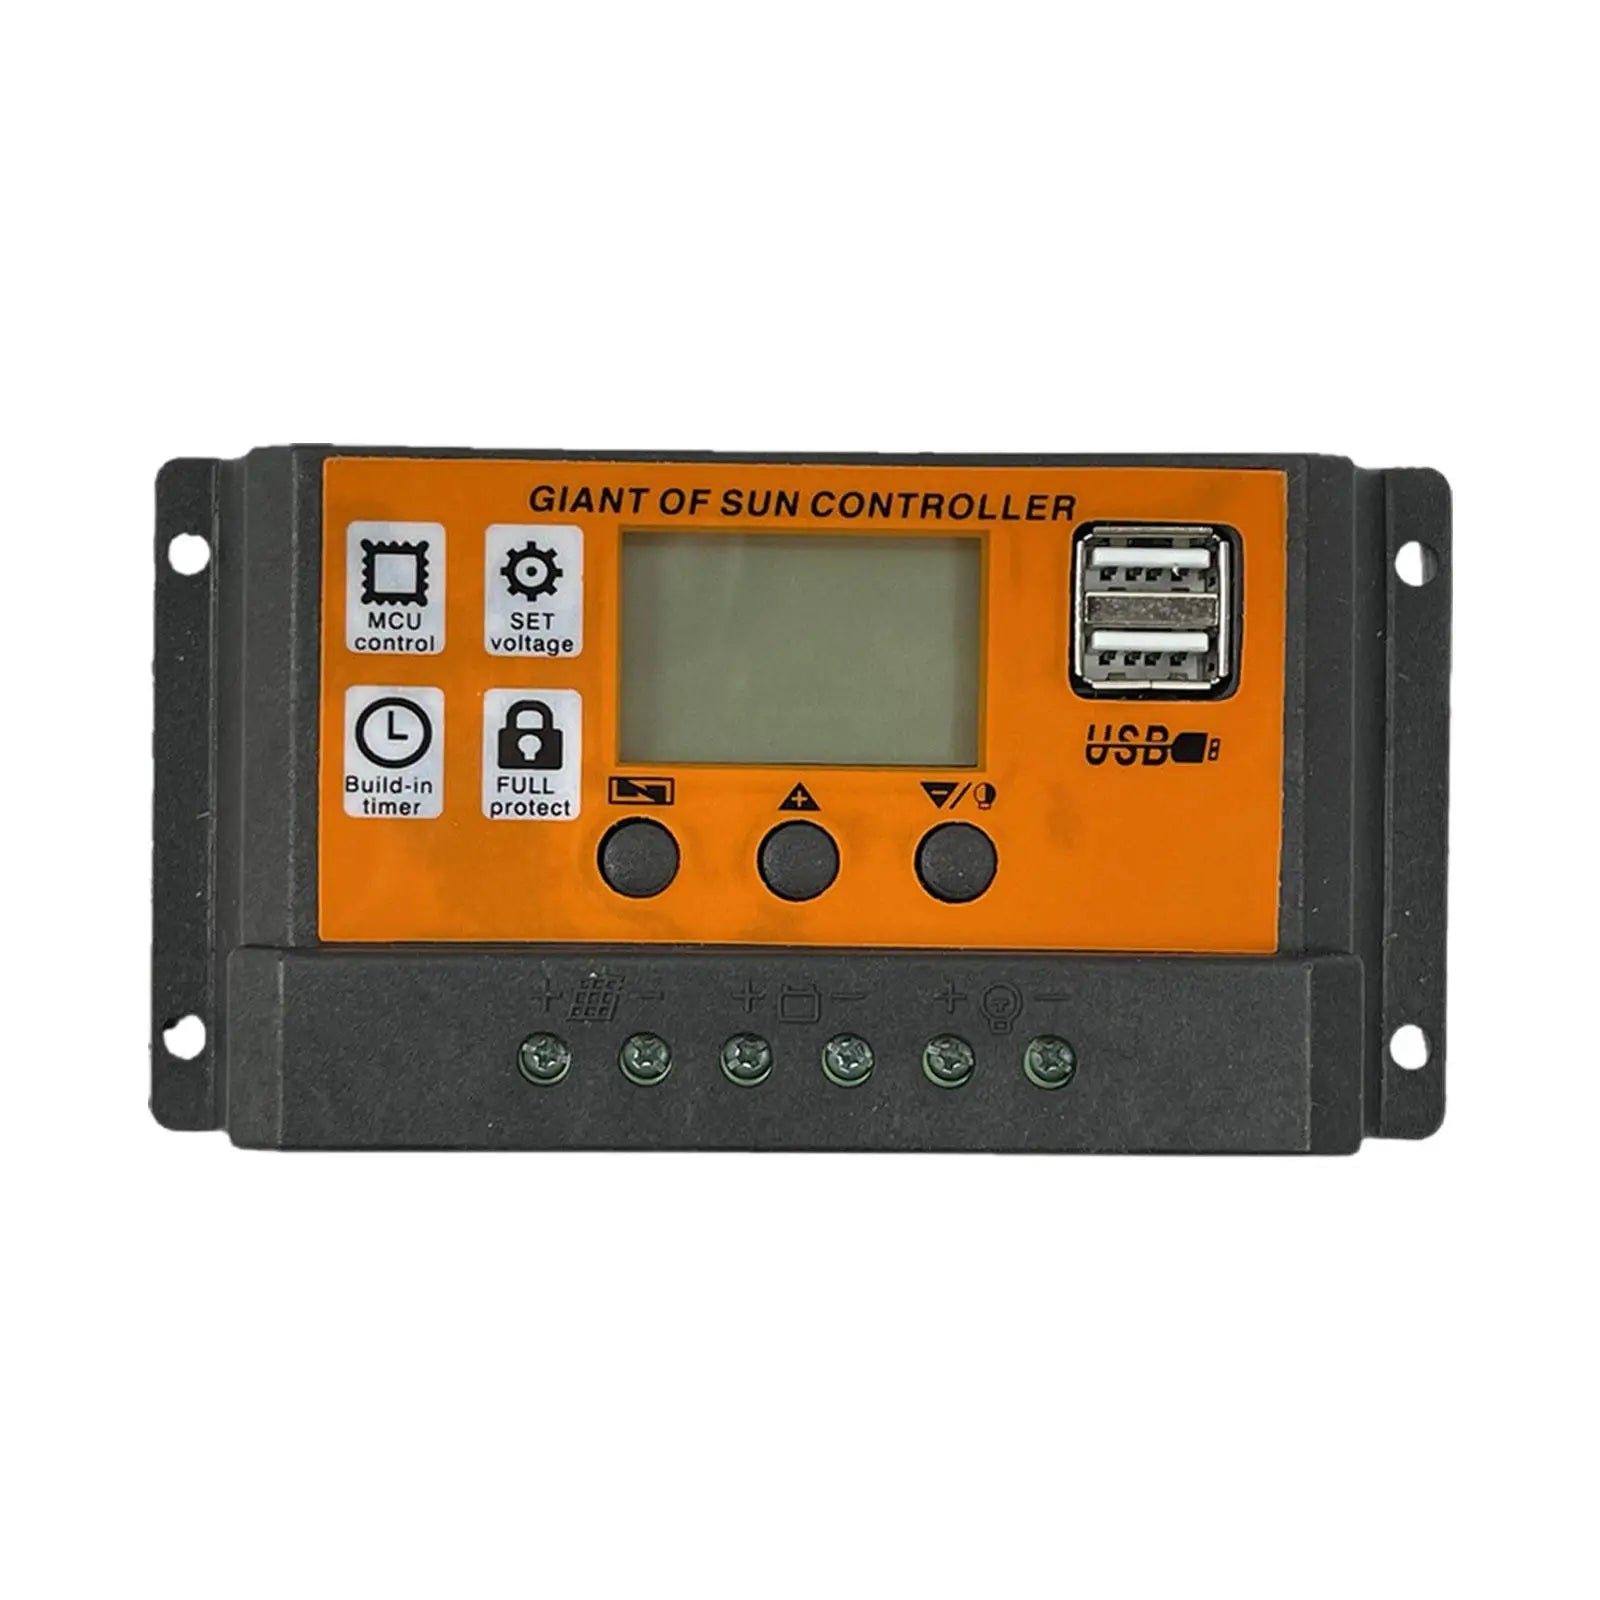 MPPT Solar Charge Controller, Smart solar charge controller with timer and overcharge protection, USB connectivity, and adjustable voltage control.